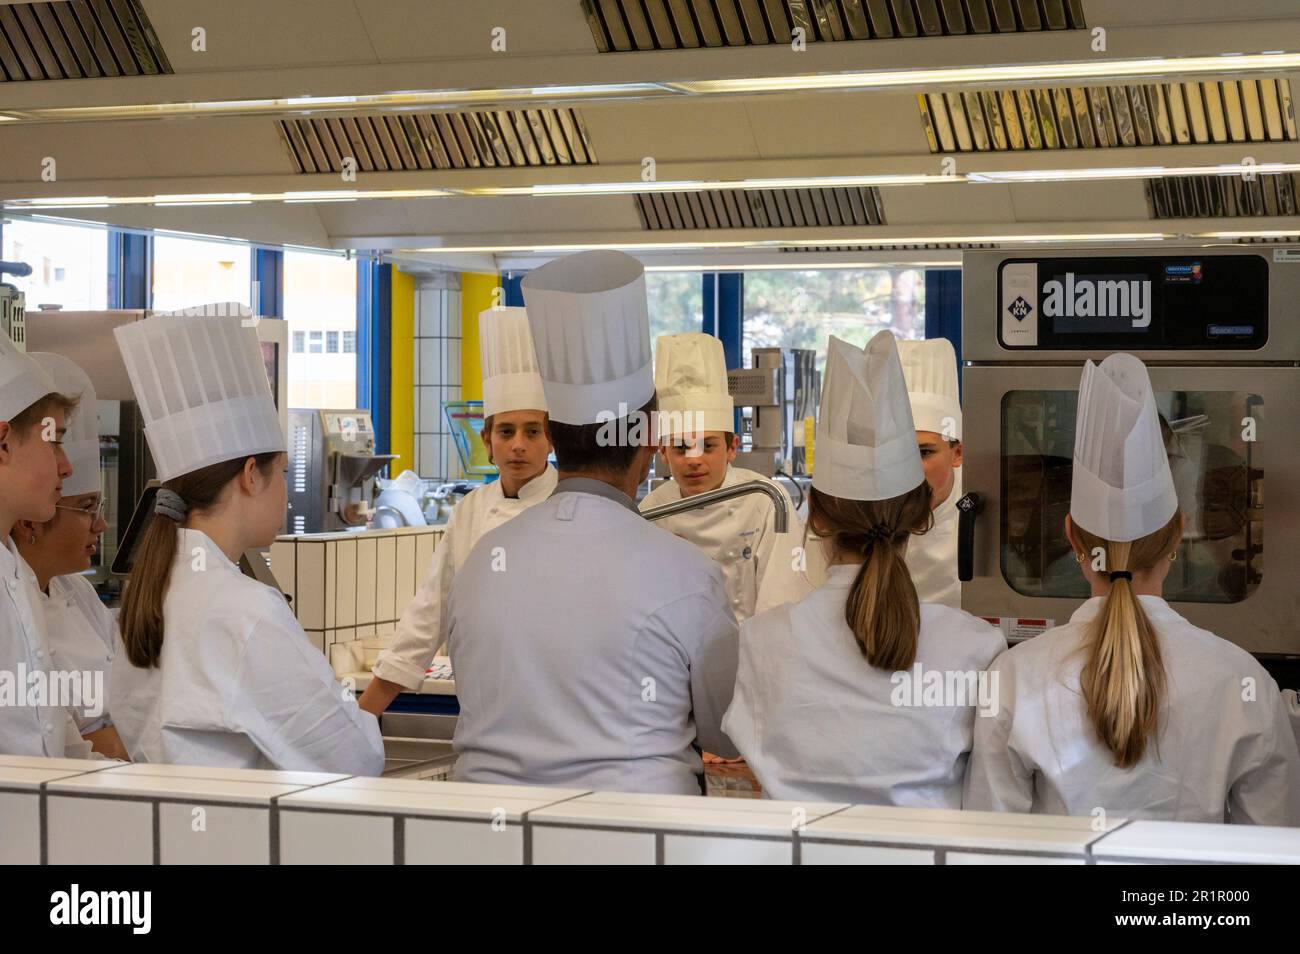 Italy, Trentino-Alto Adige, Alto Adige - South Tyrol, Eisacktel, Bressanone, Provincial Vocational School for the Hospitality and Food Trades, Emma Hellenstainer, Armin Mairhofer Stock Photo